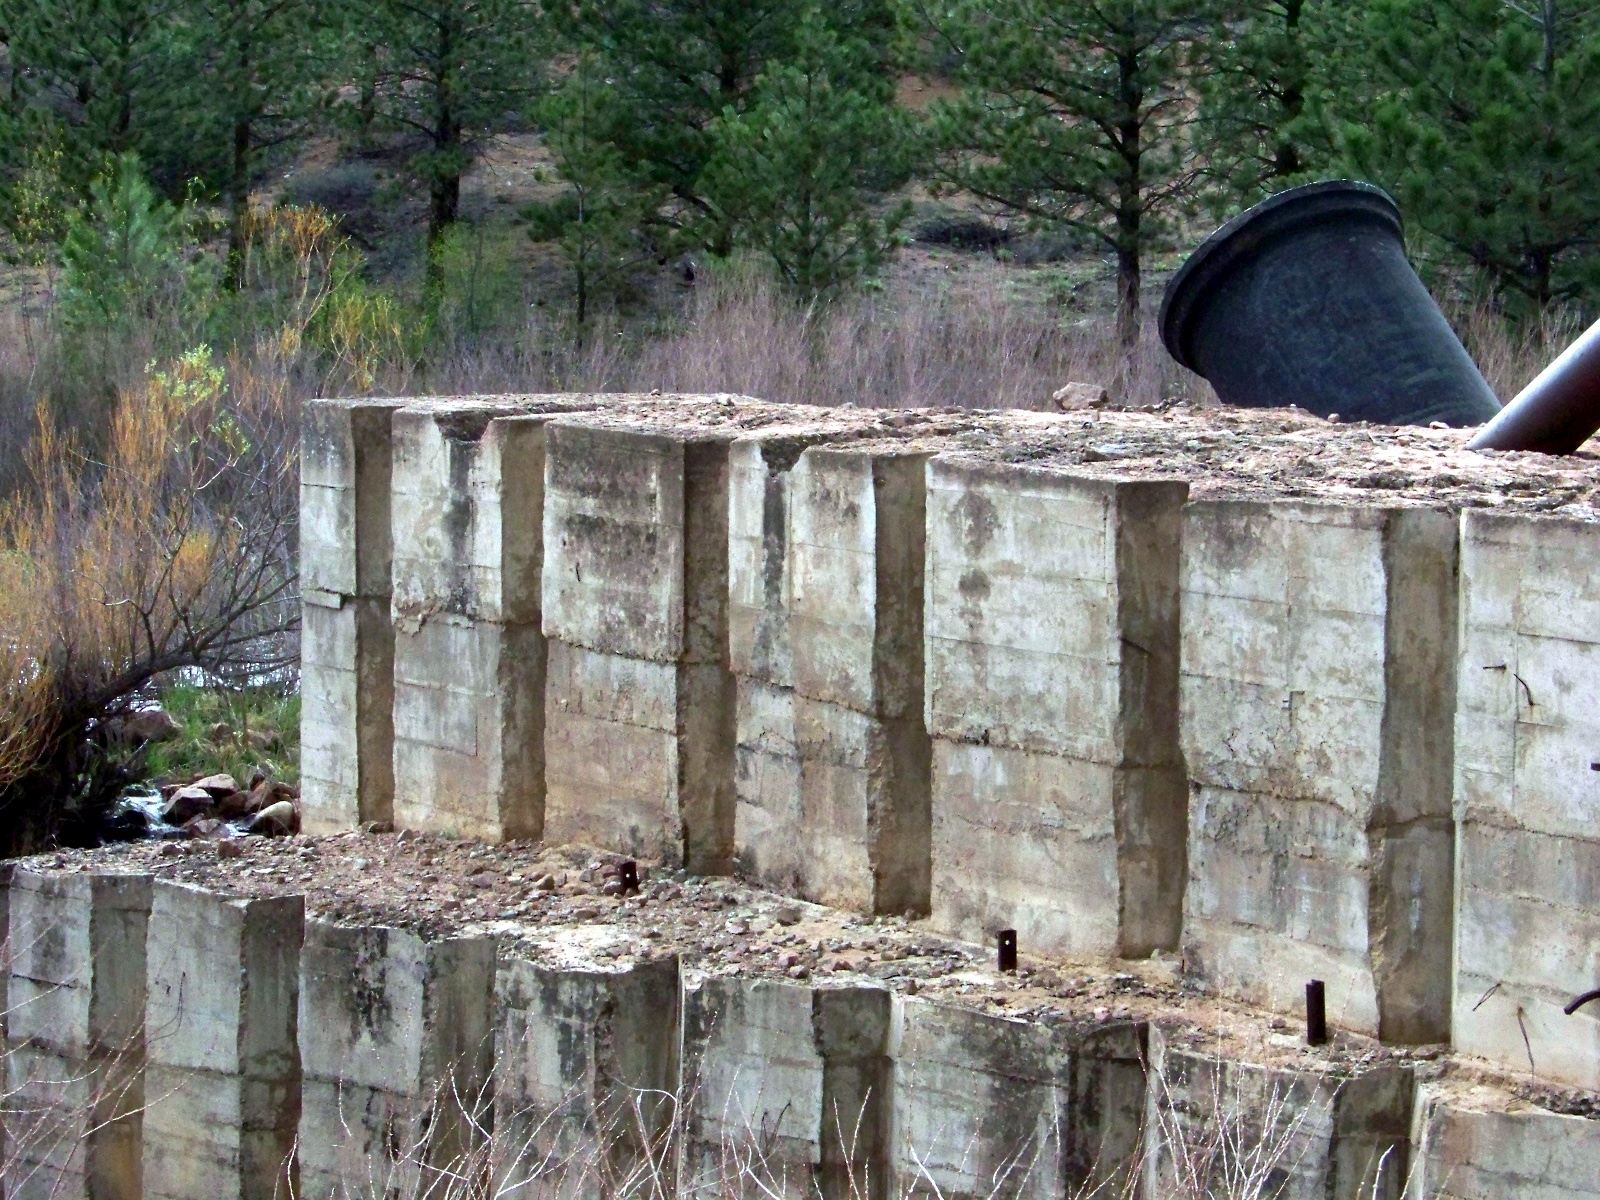 Detail of the concrete layers used to construct the dam.